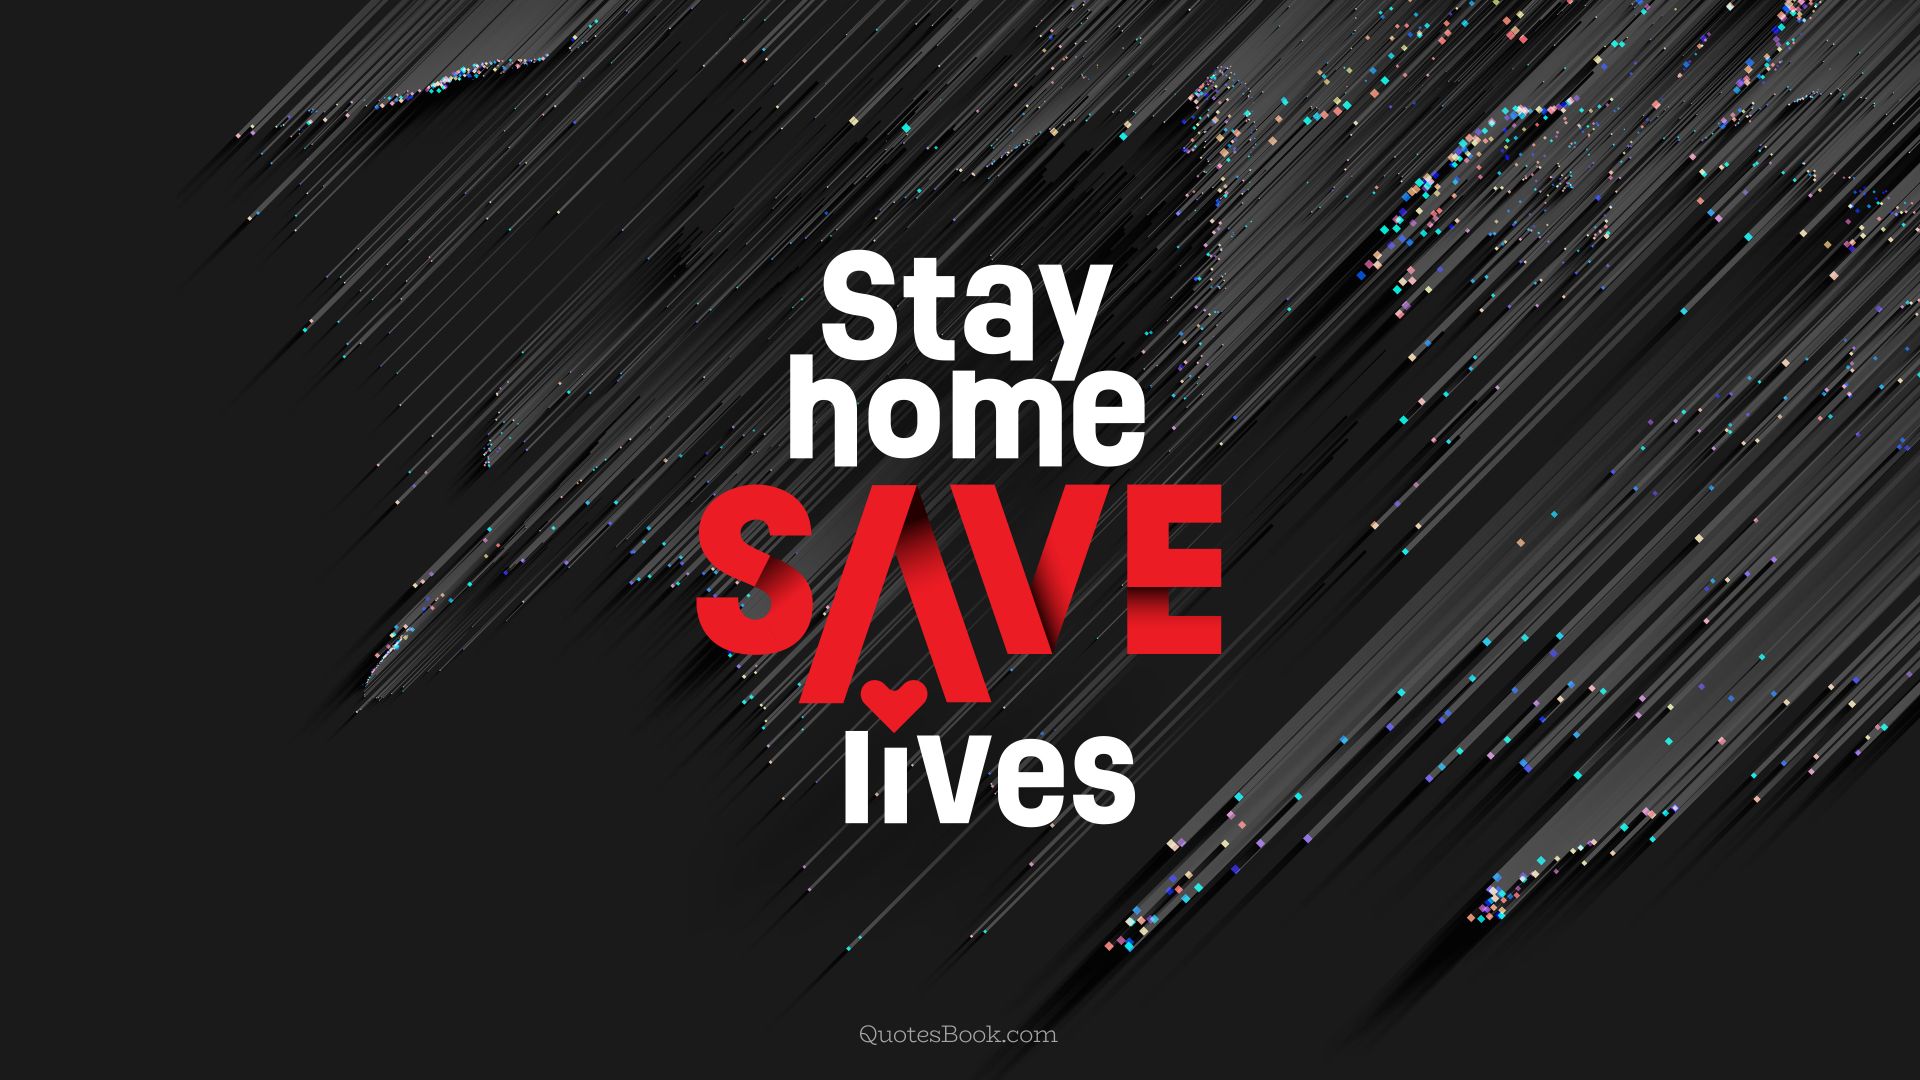 Stay home save lives